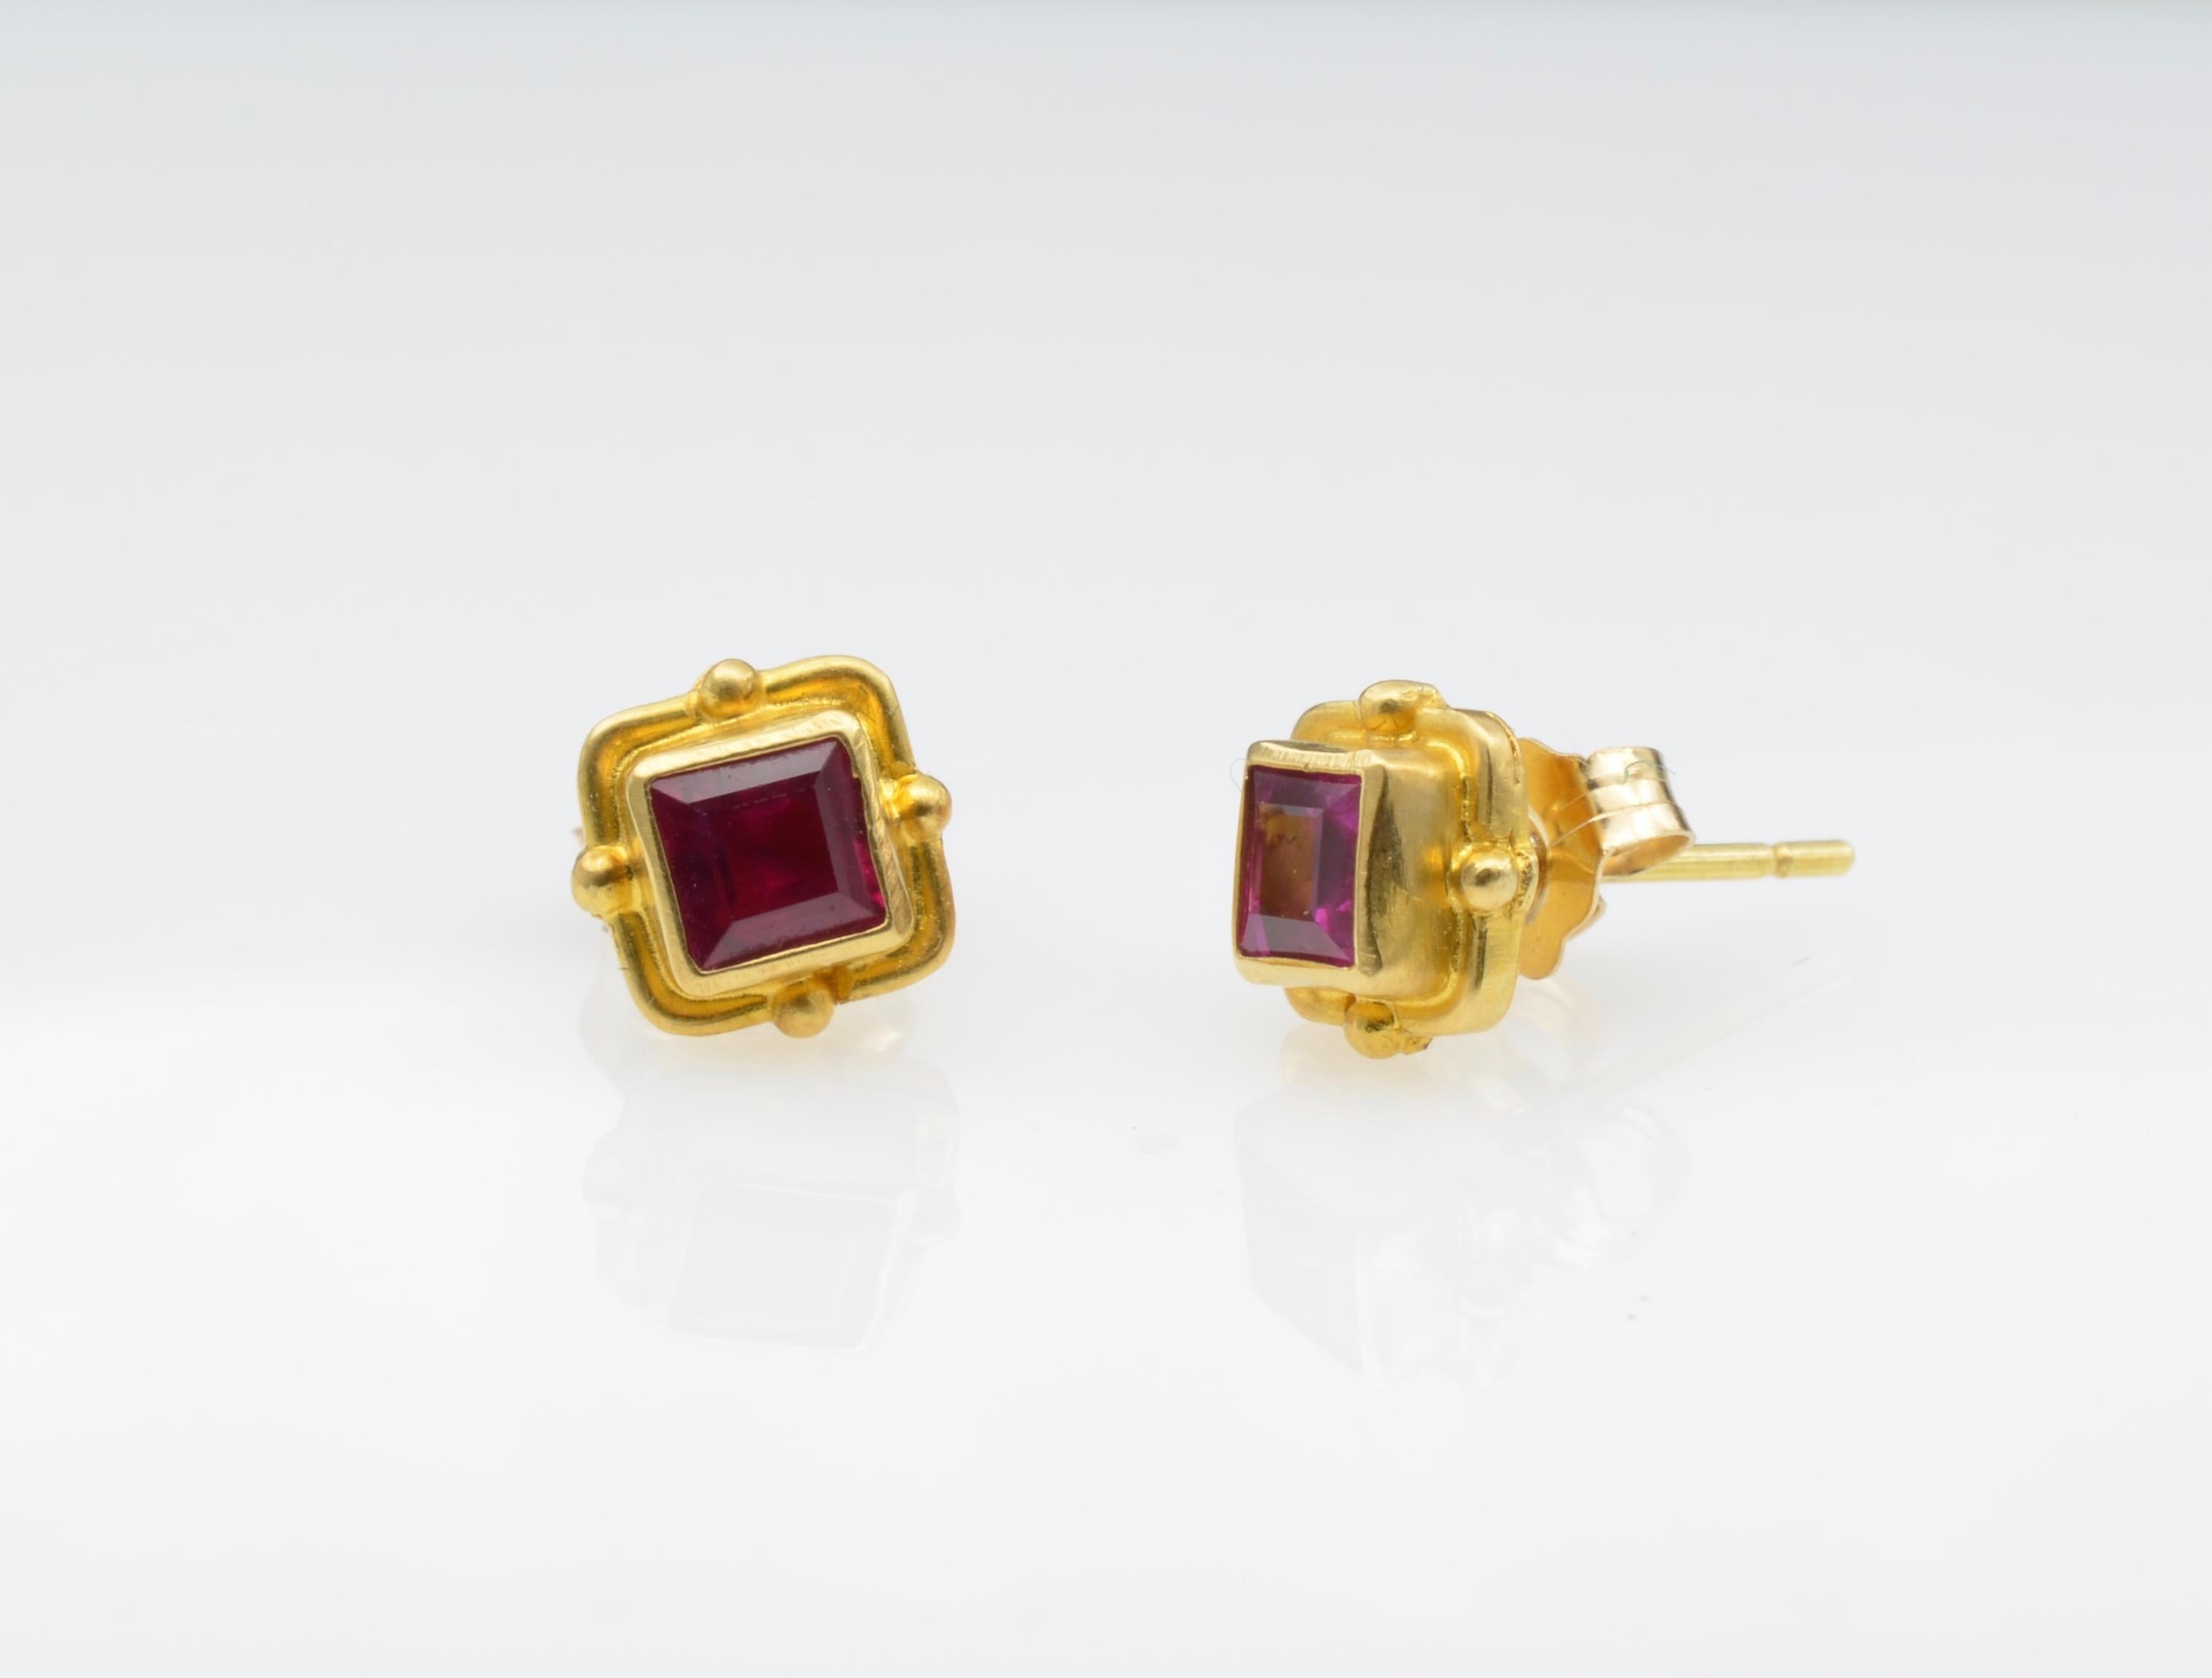 These delicate ruby beauties are vibrant deep red accented by 18k yellow gold for the perfect balance.  The delicate beaded bezel adds dimension. You can wear these every day as they are so pretty!